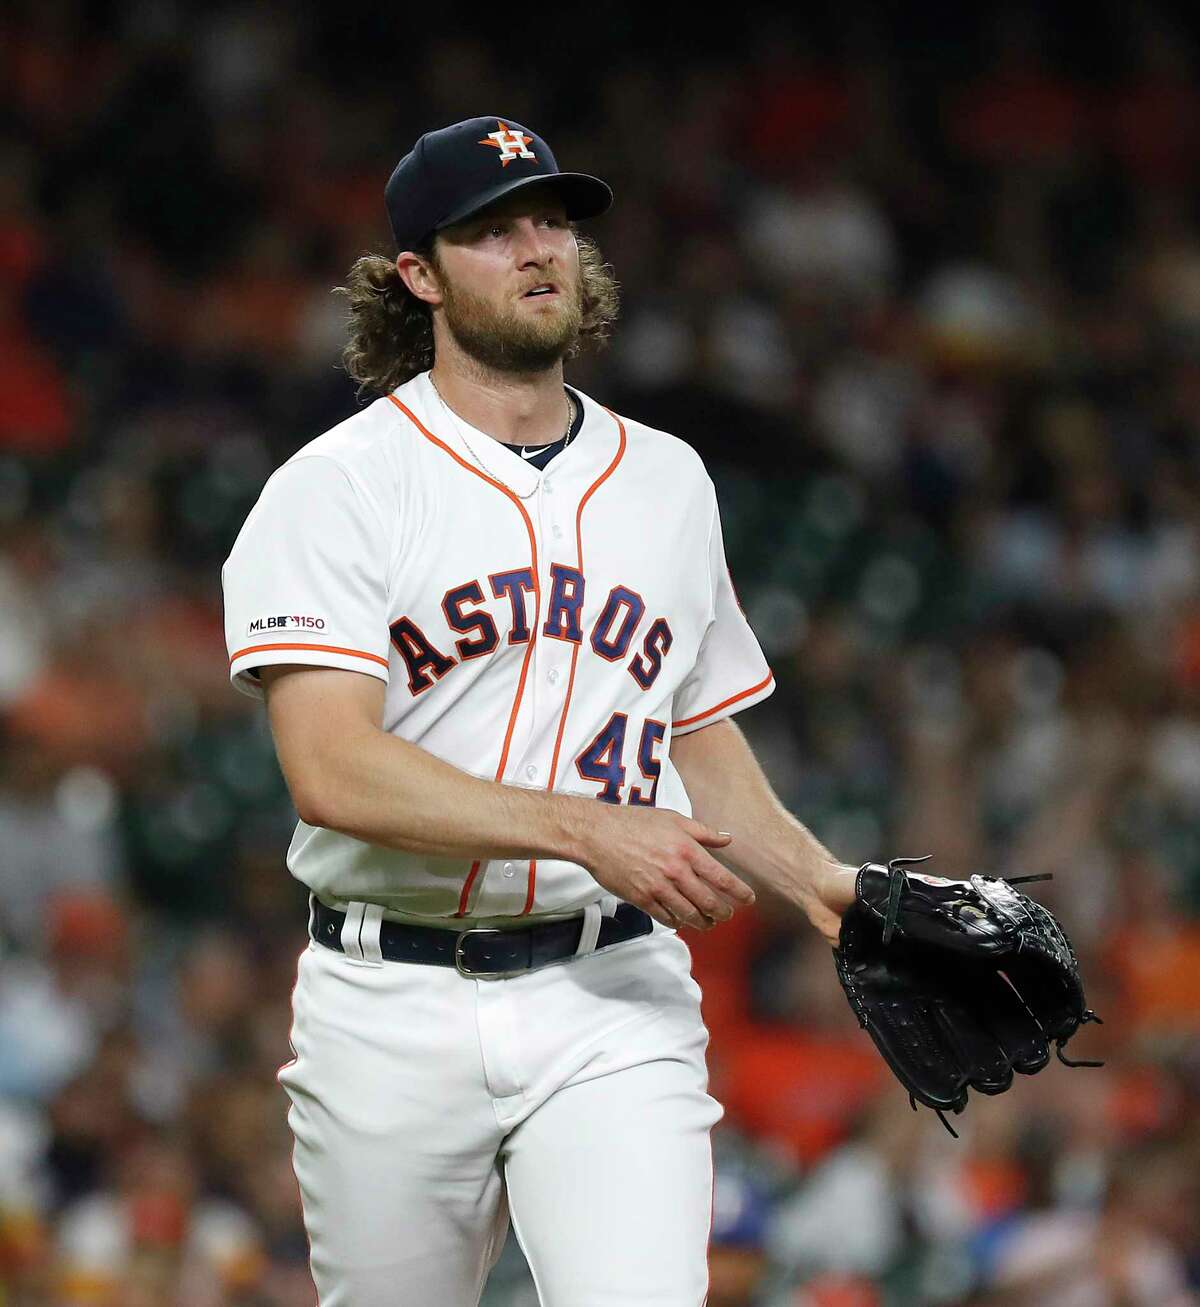 Houston Astros starting pitcher Gerrit Cole (45) reacts after striking out Texas Rangers Ronald Guzman in the second inning of an MLB baseball game at Minute Maid Park, Wednesday, Sept. 18, 2019, in Houston.